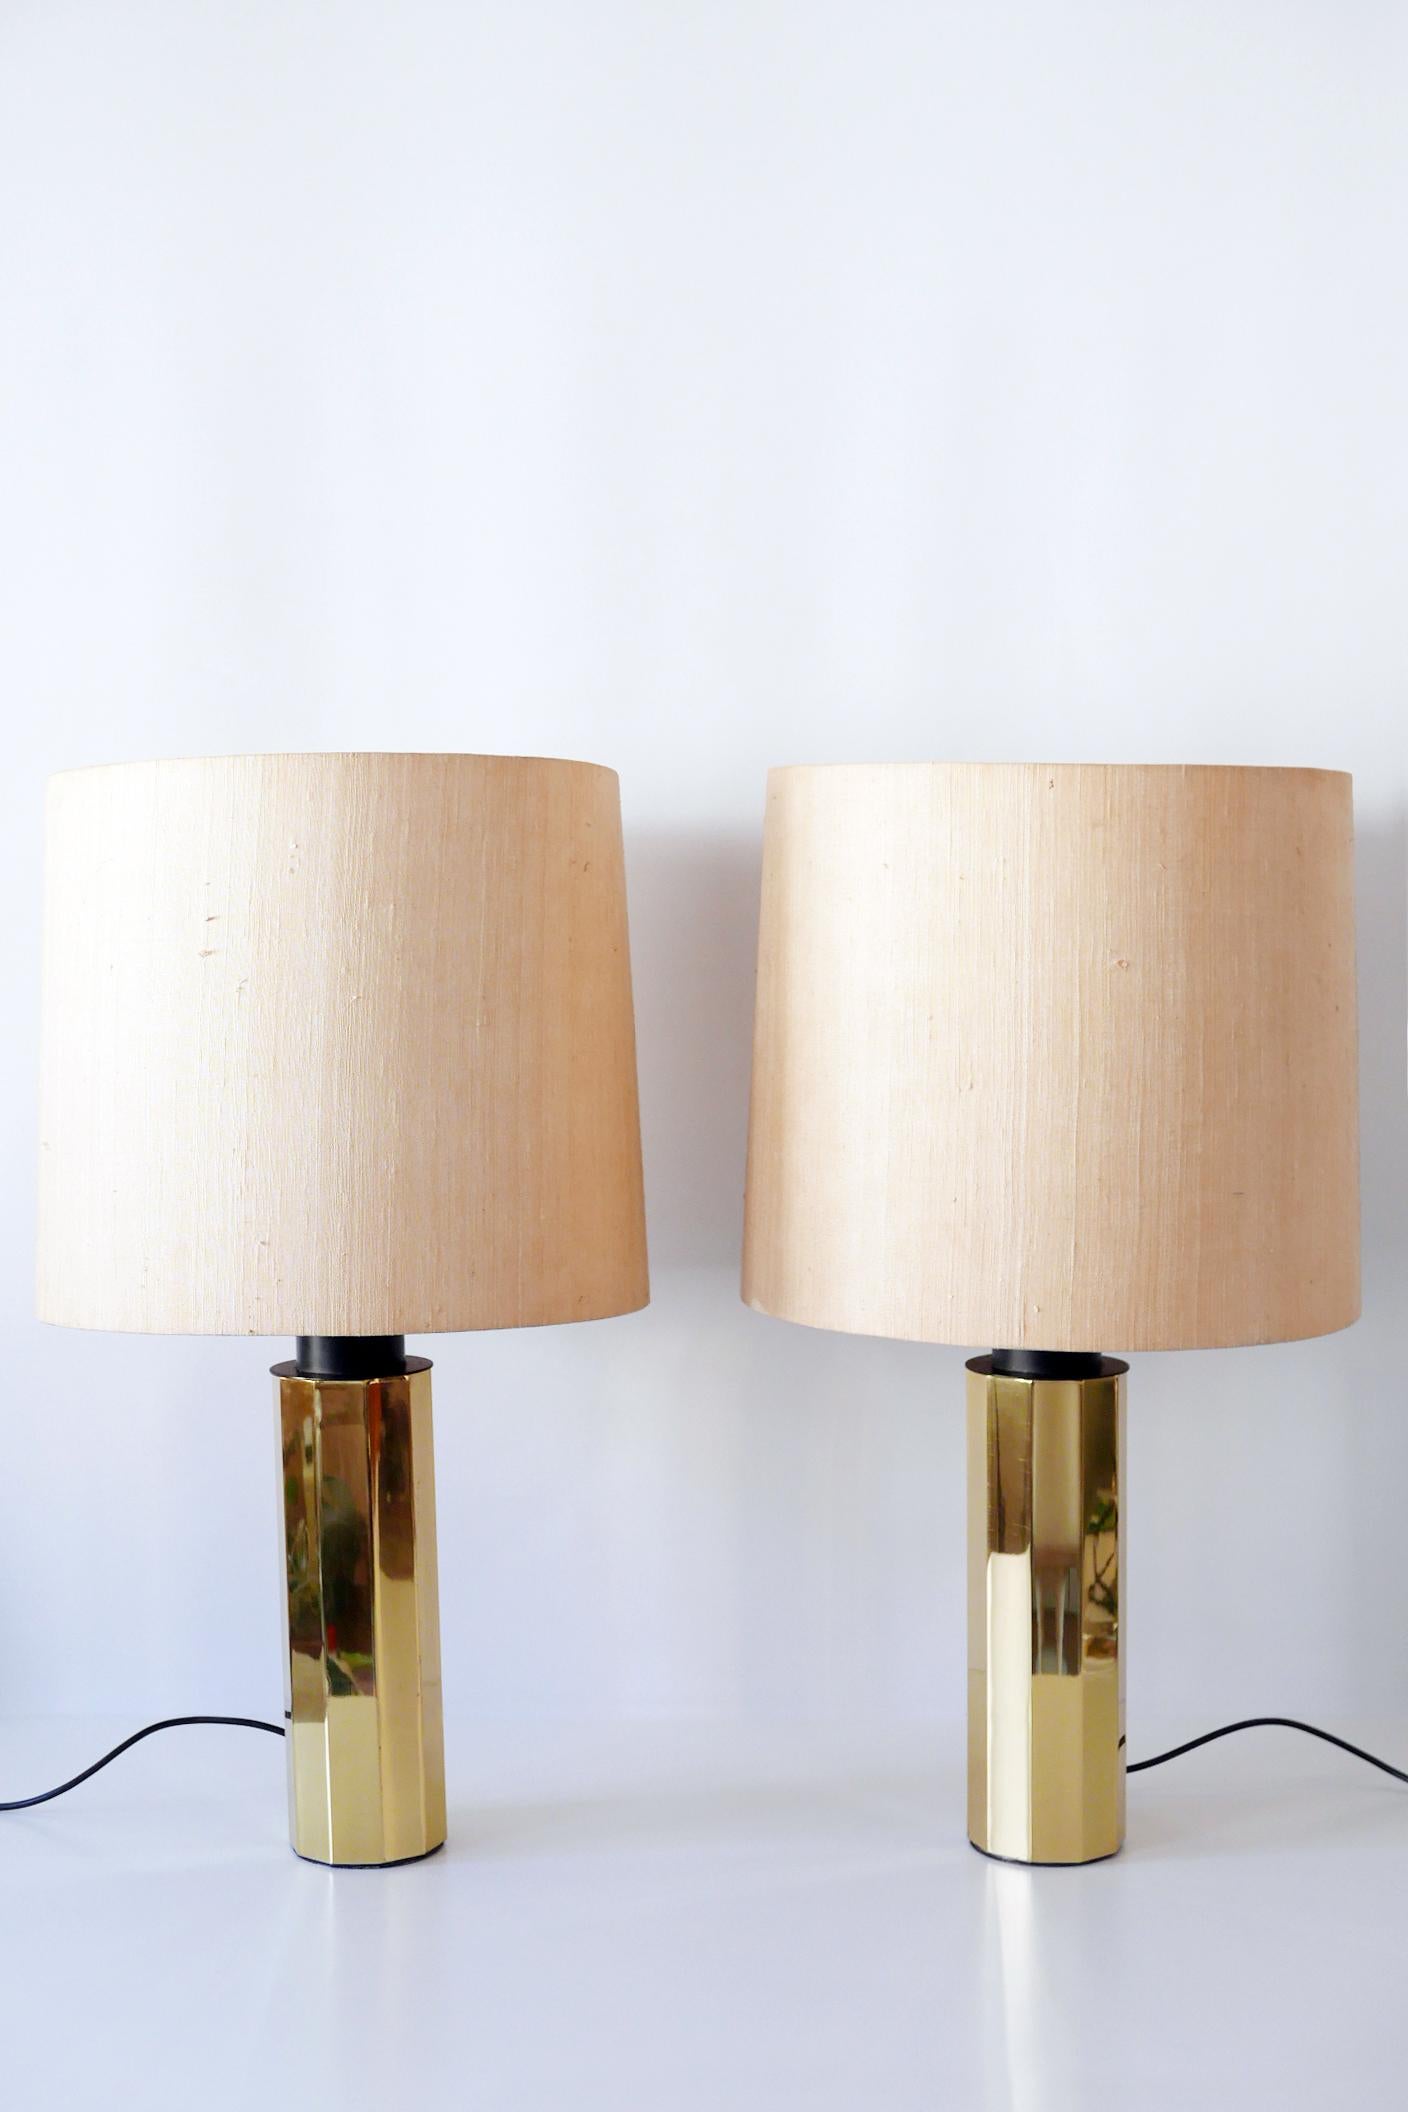 Metal Set of Two Huge, 5-Flamed Midcentury Decagonal Brass Table Lamps, 1960s, Germany For Sale